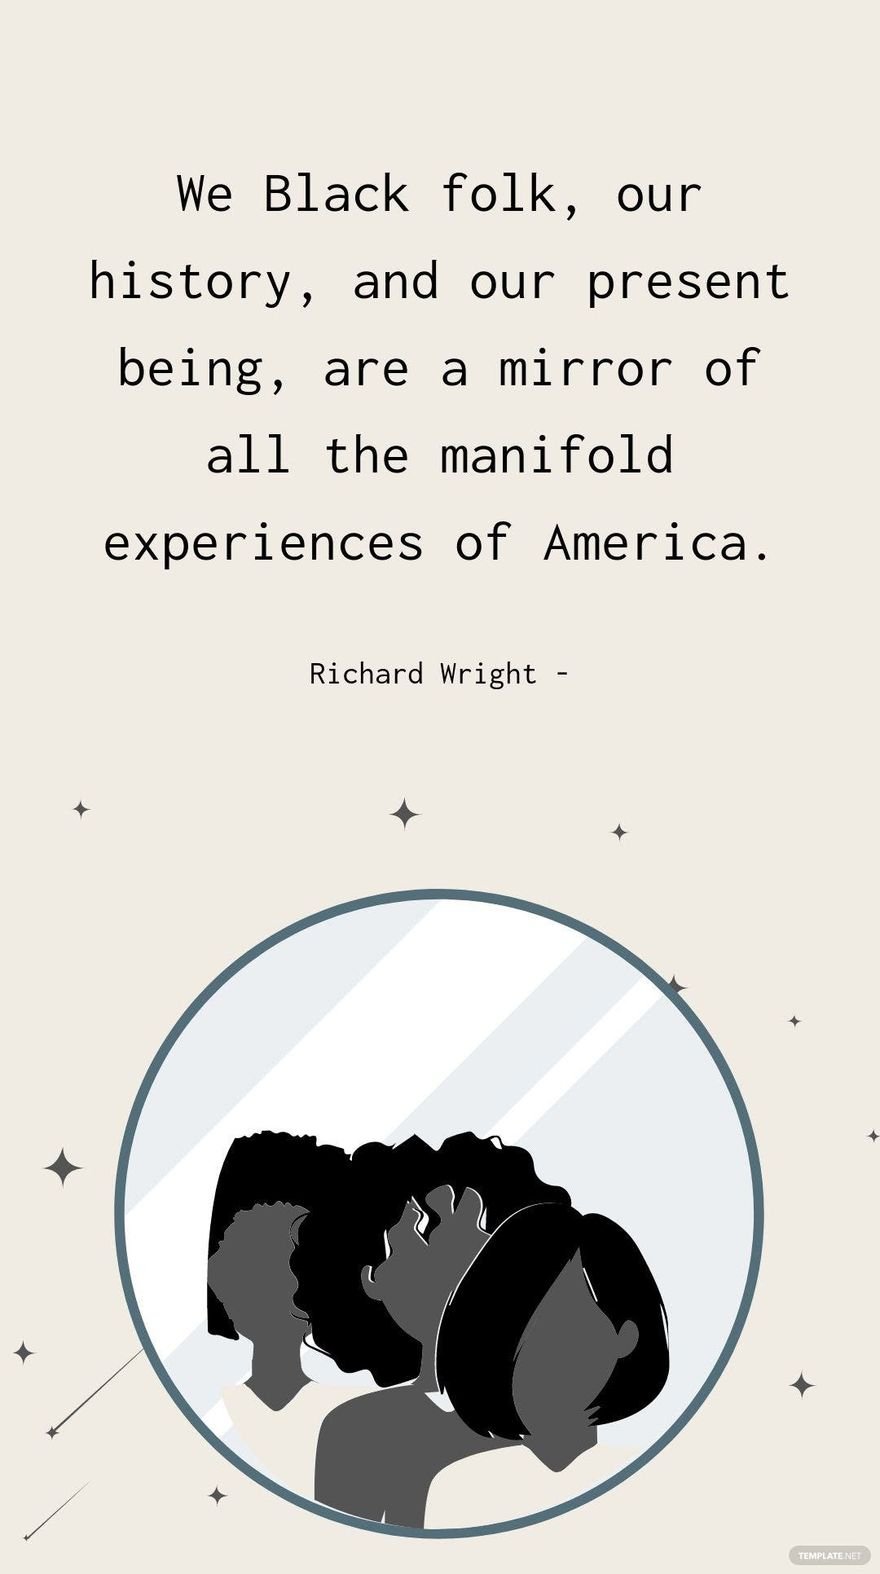 Free Richard Wright - We Black folk, our history, and our present being, are a mirror of all the manifold experiences of America. in JPG